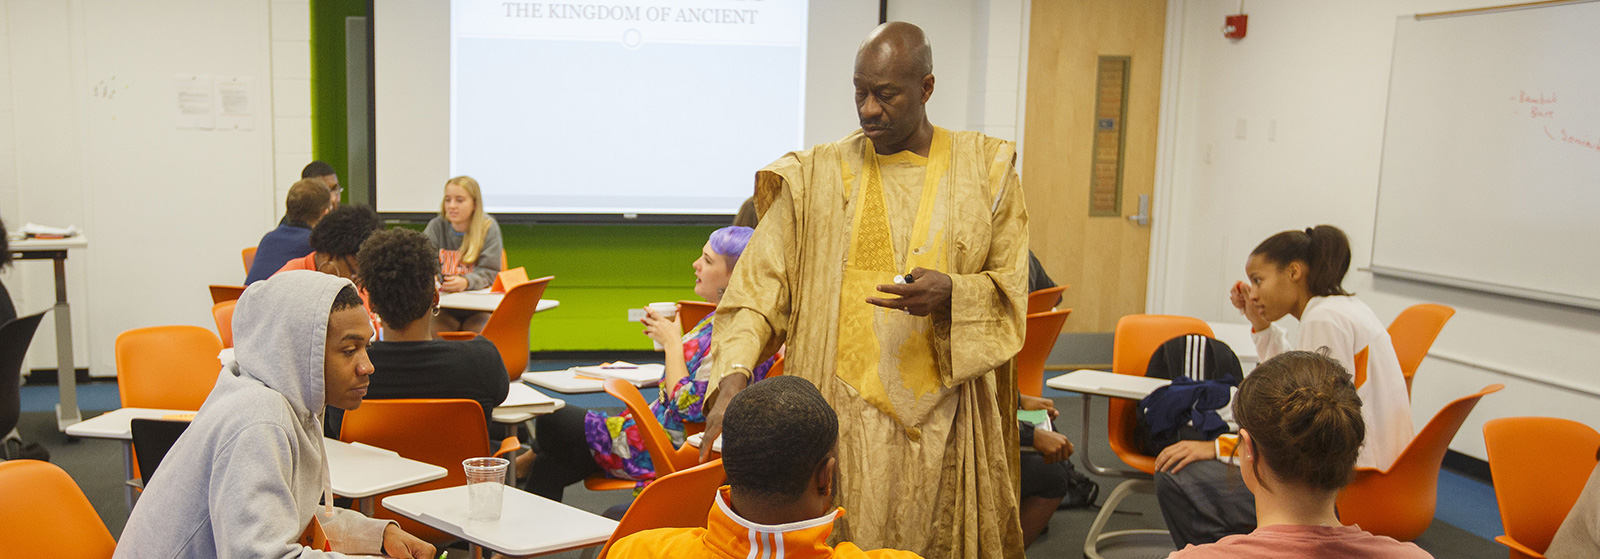 A lecturer speaks with his students at UT Knoxville